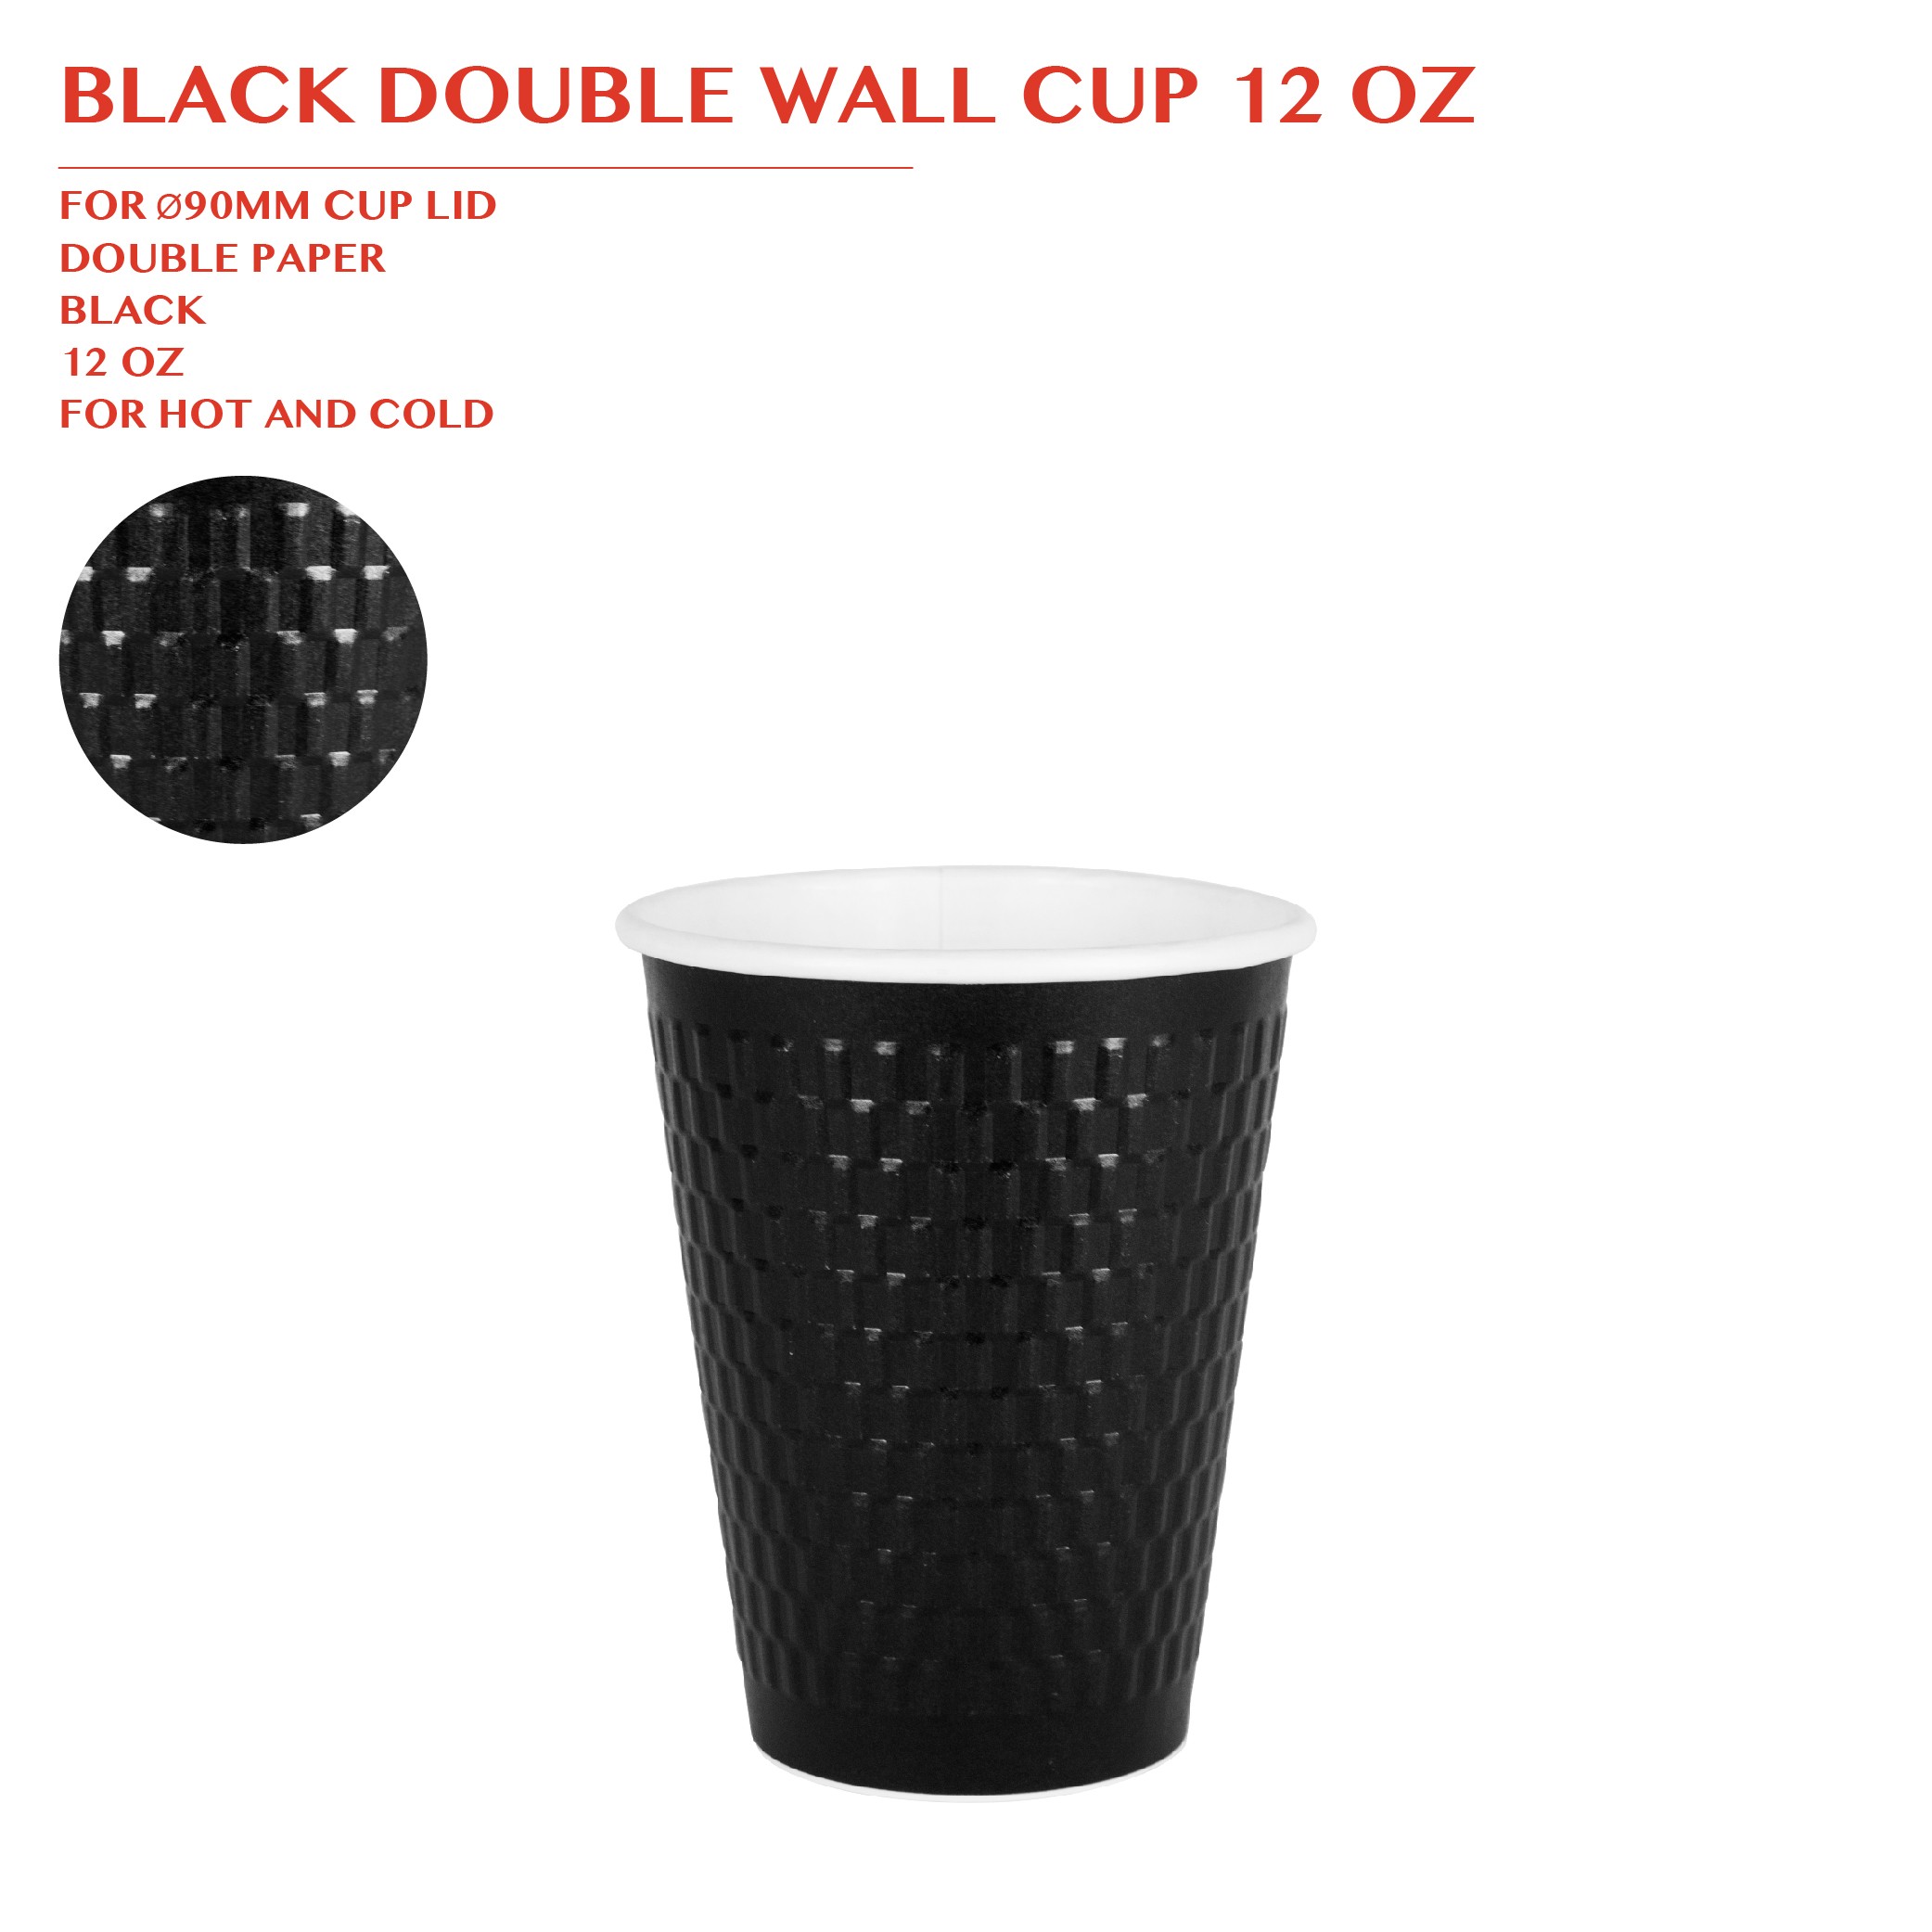 PRE-ORDER BLACK DOUBLE WALL CUP 12 OZ